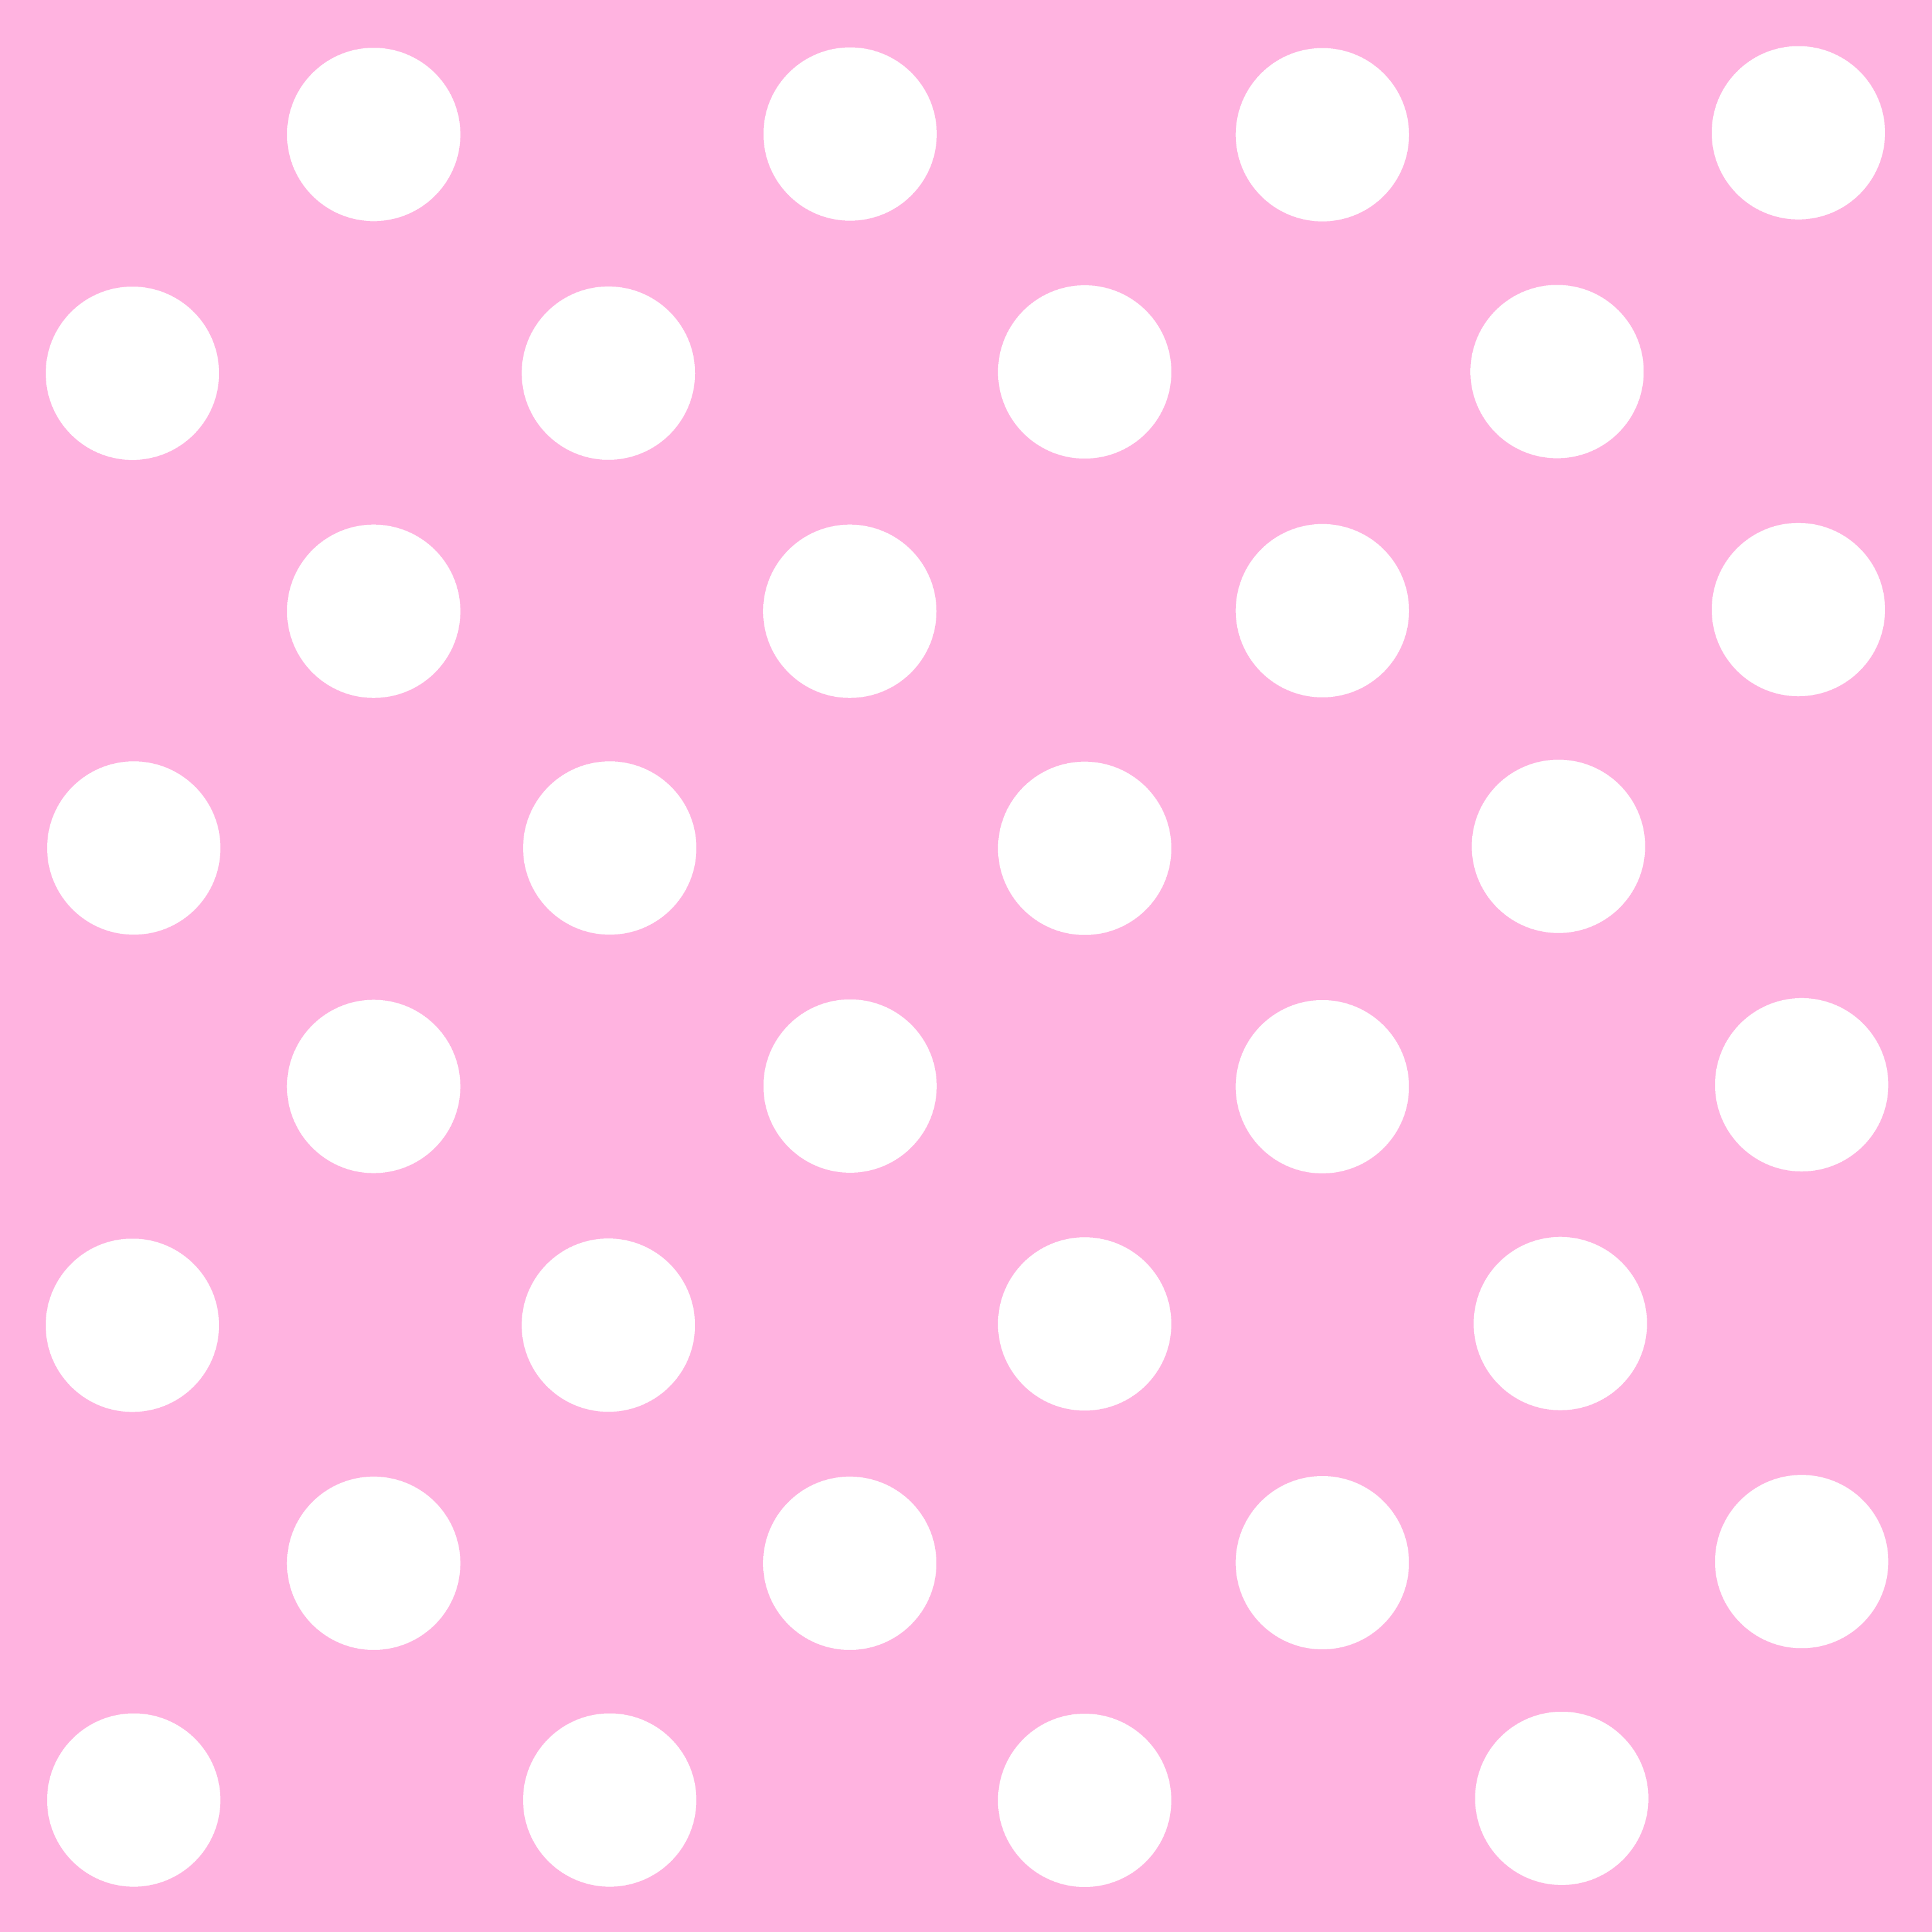 Pink And White Polka Dots Pattern Free Clip Art